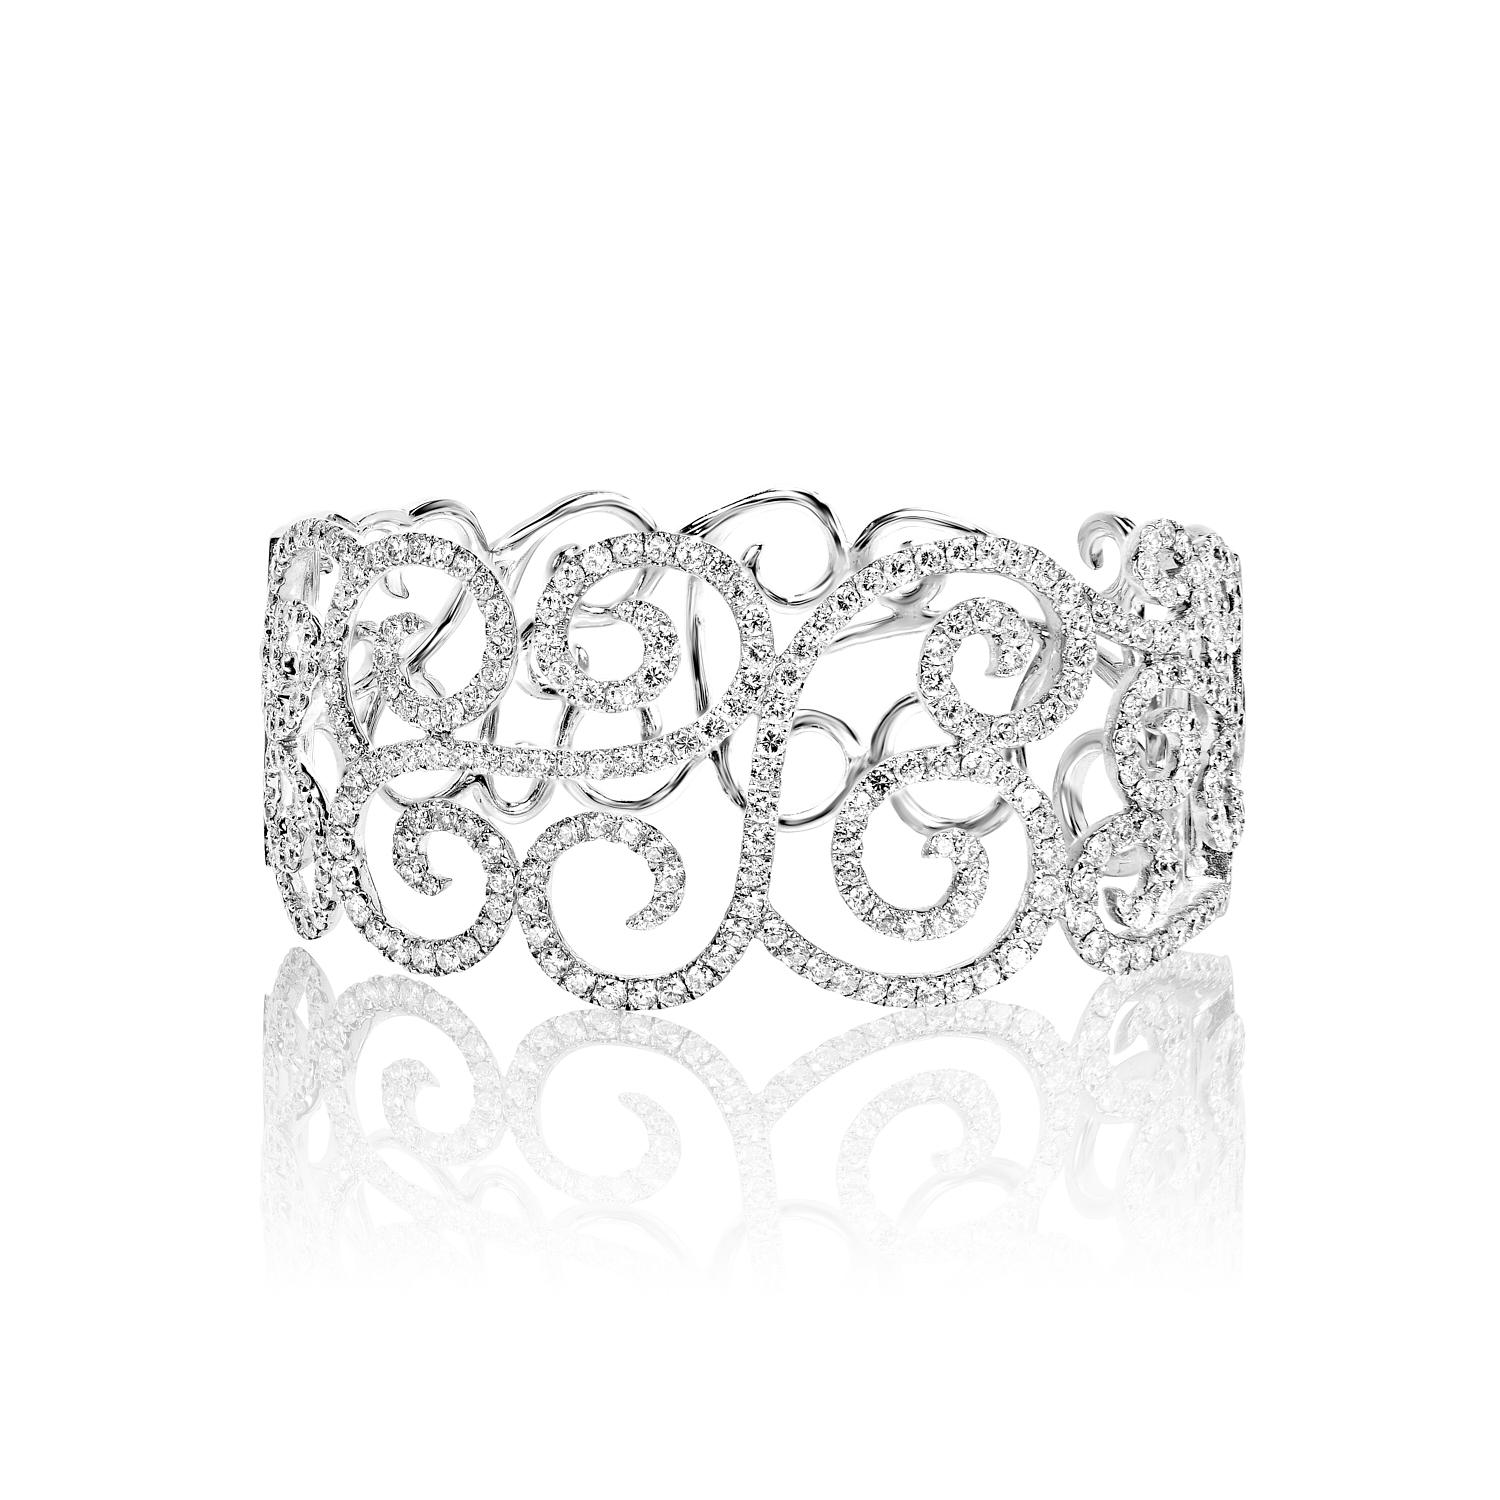 The KIARA 7.30 Carat Diamond Bangle Bracelet features ROUND BRILLIANT CUT DIAMONDS brilliants weighing a total of approximately 7.30 carats, set in 14K White Gold.

Style:
Diamonds
Diamond Size: 7.30 Carats
Diamond Shape: Round